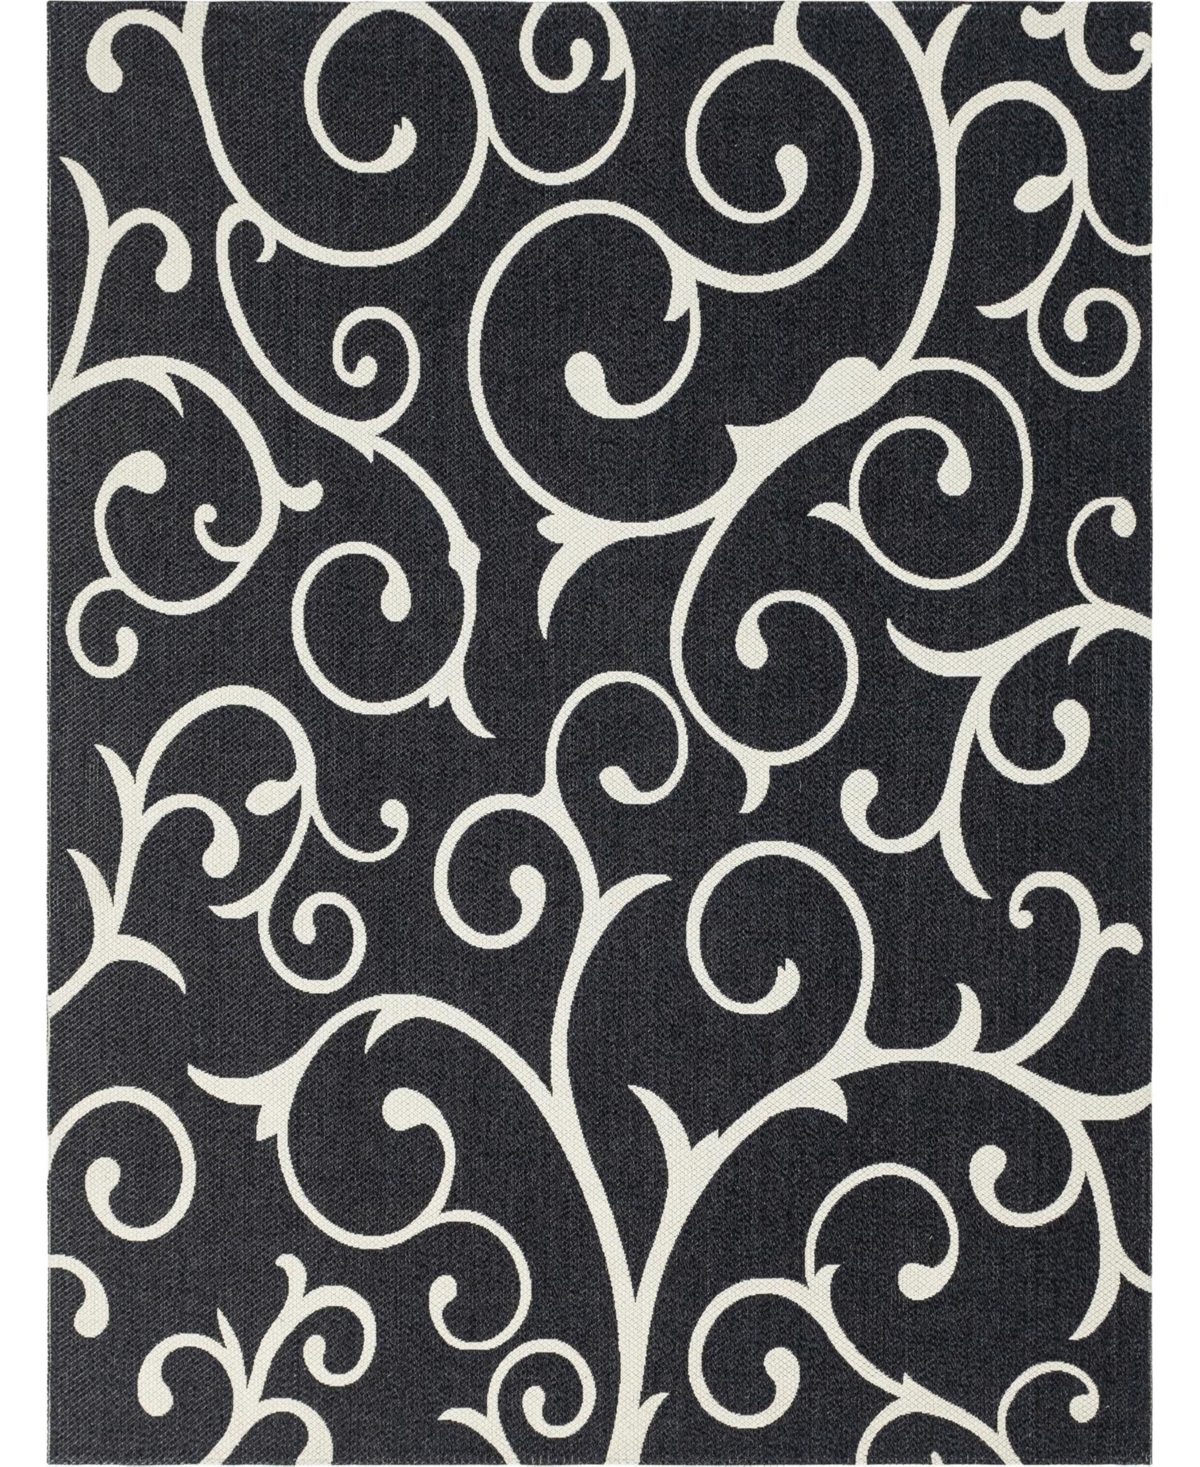 Bayshore Home Illie Scroll 8'5in x 11'4in Area Rug - Black